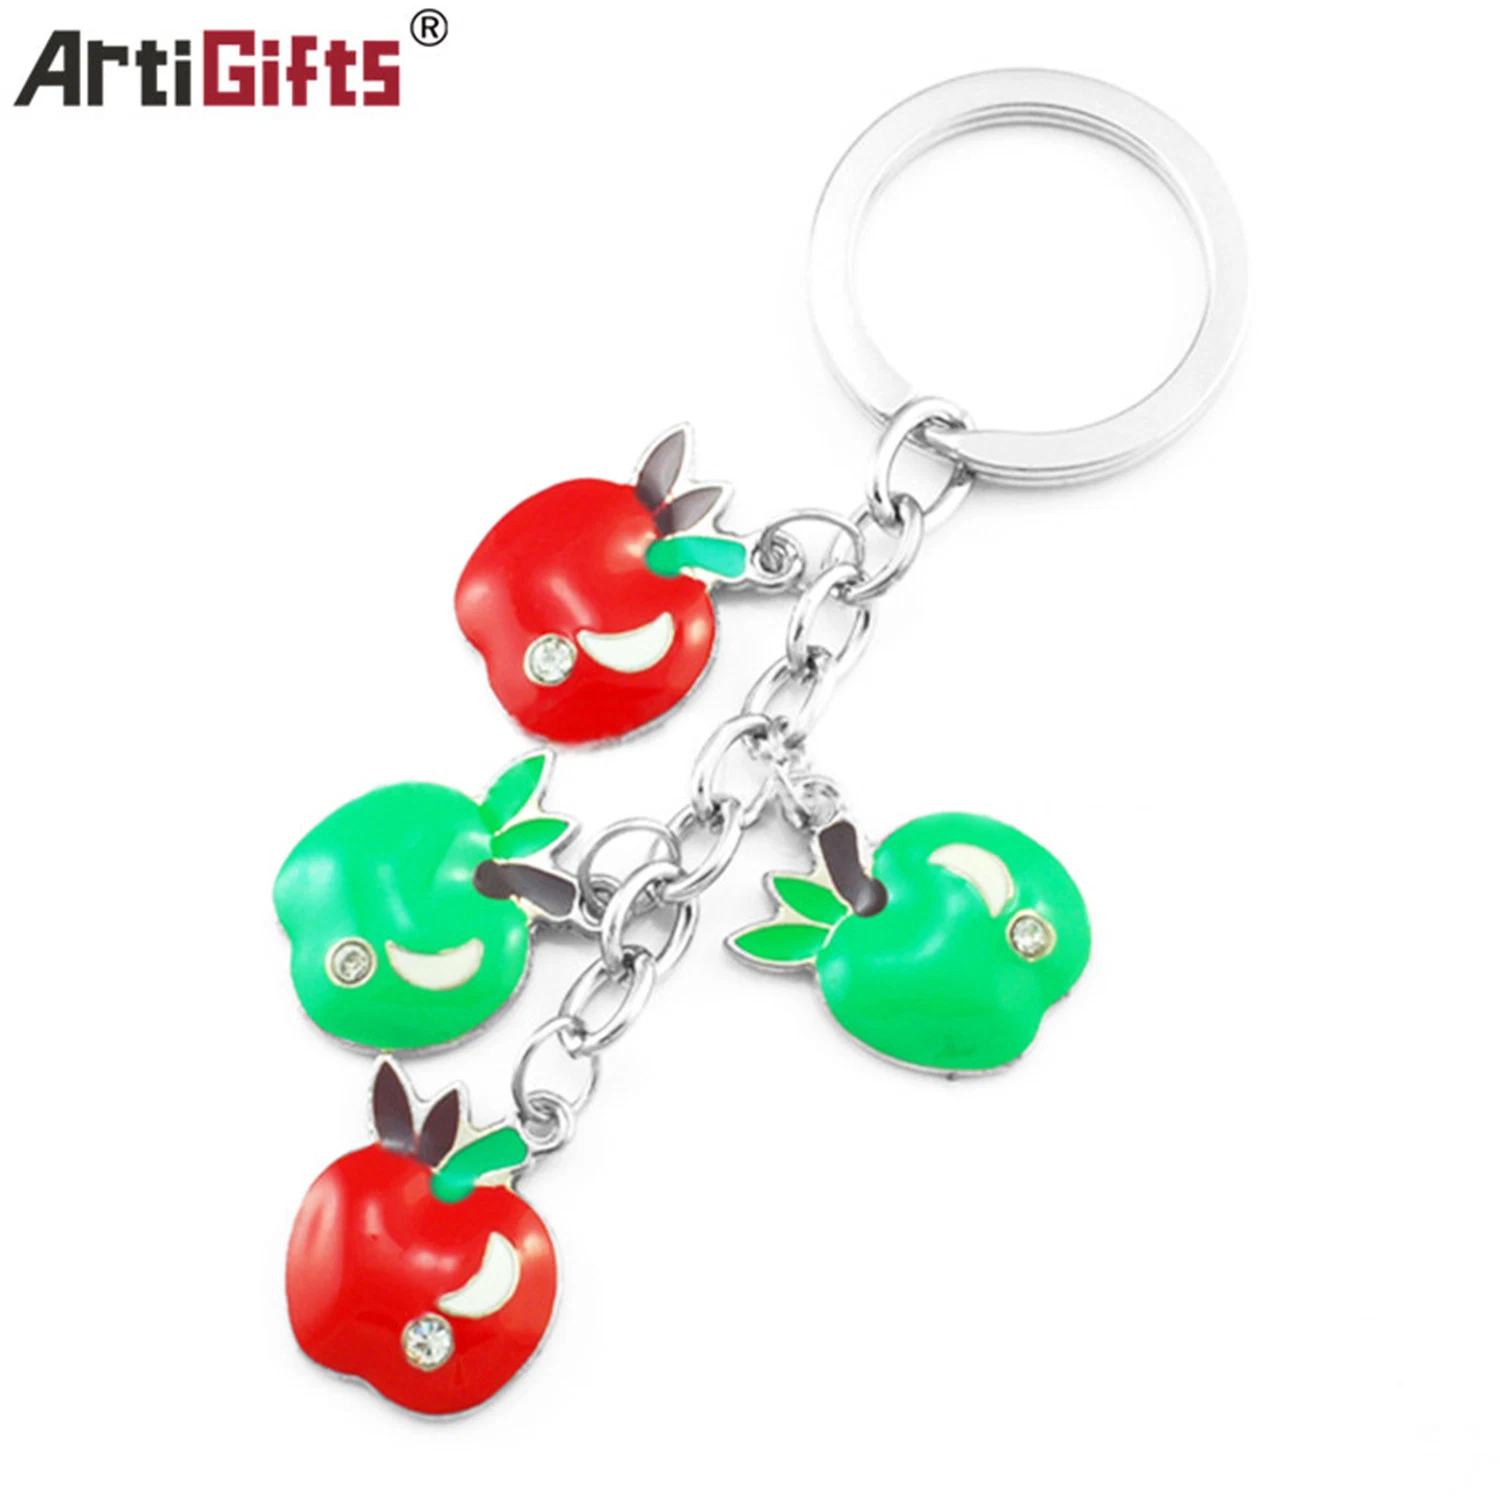 Custom Apple Shaped Key Chain as Promotion Gift